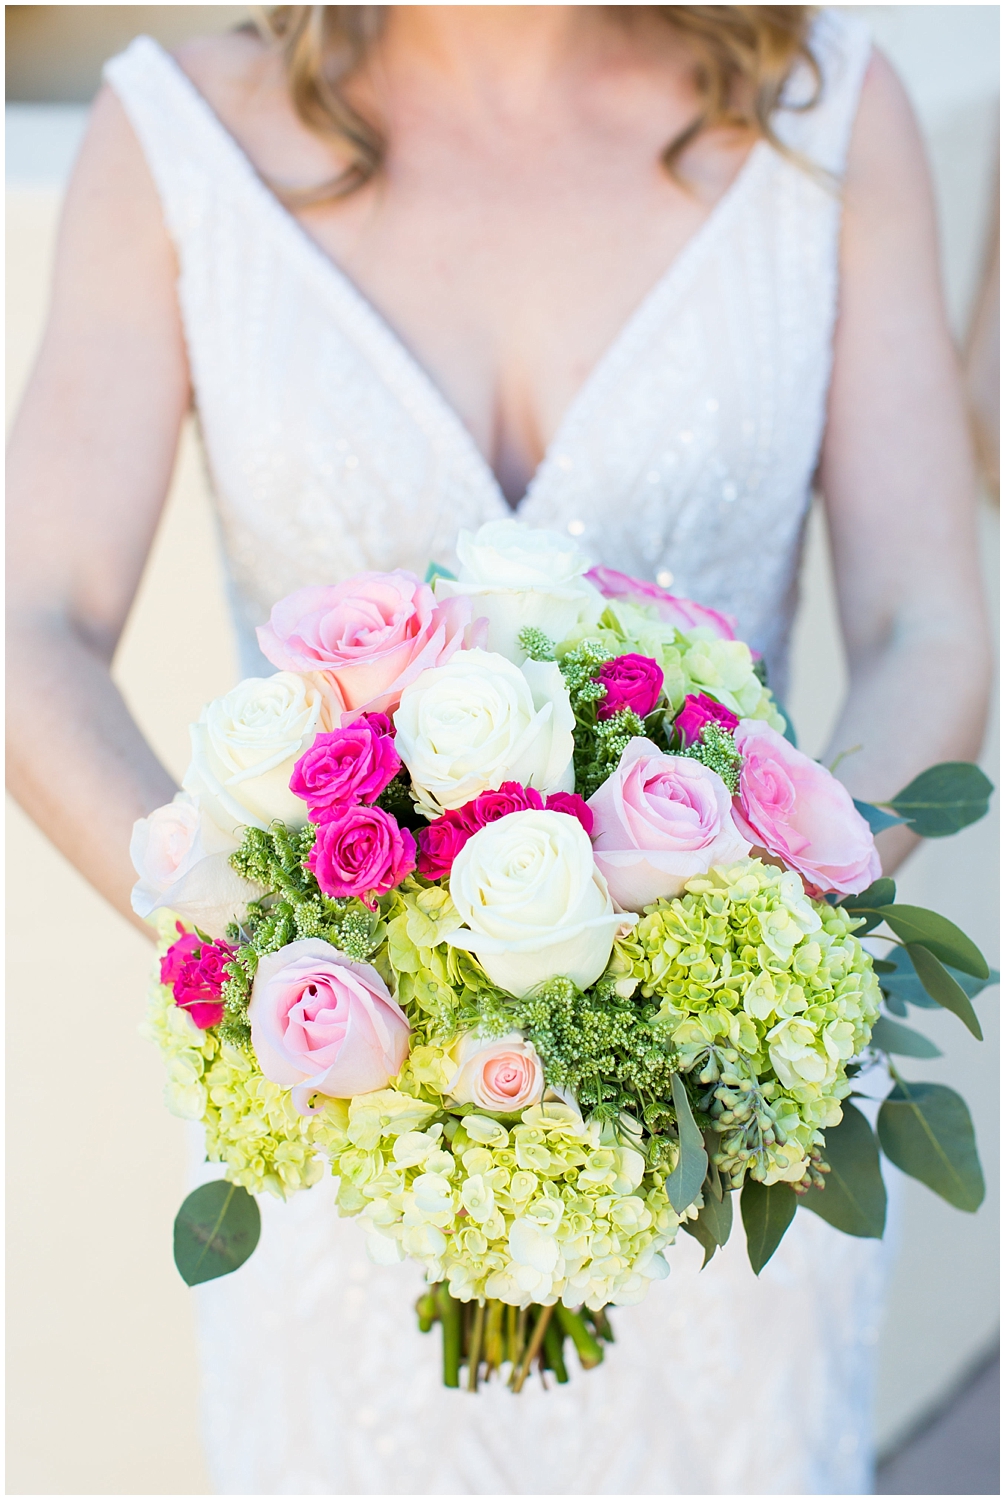 bride wedding bouquet with white, bright and blush pink roses and greenery